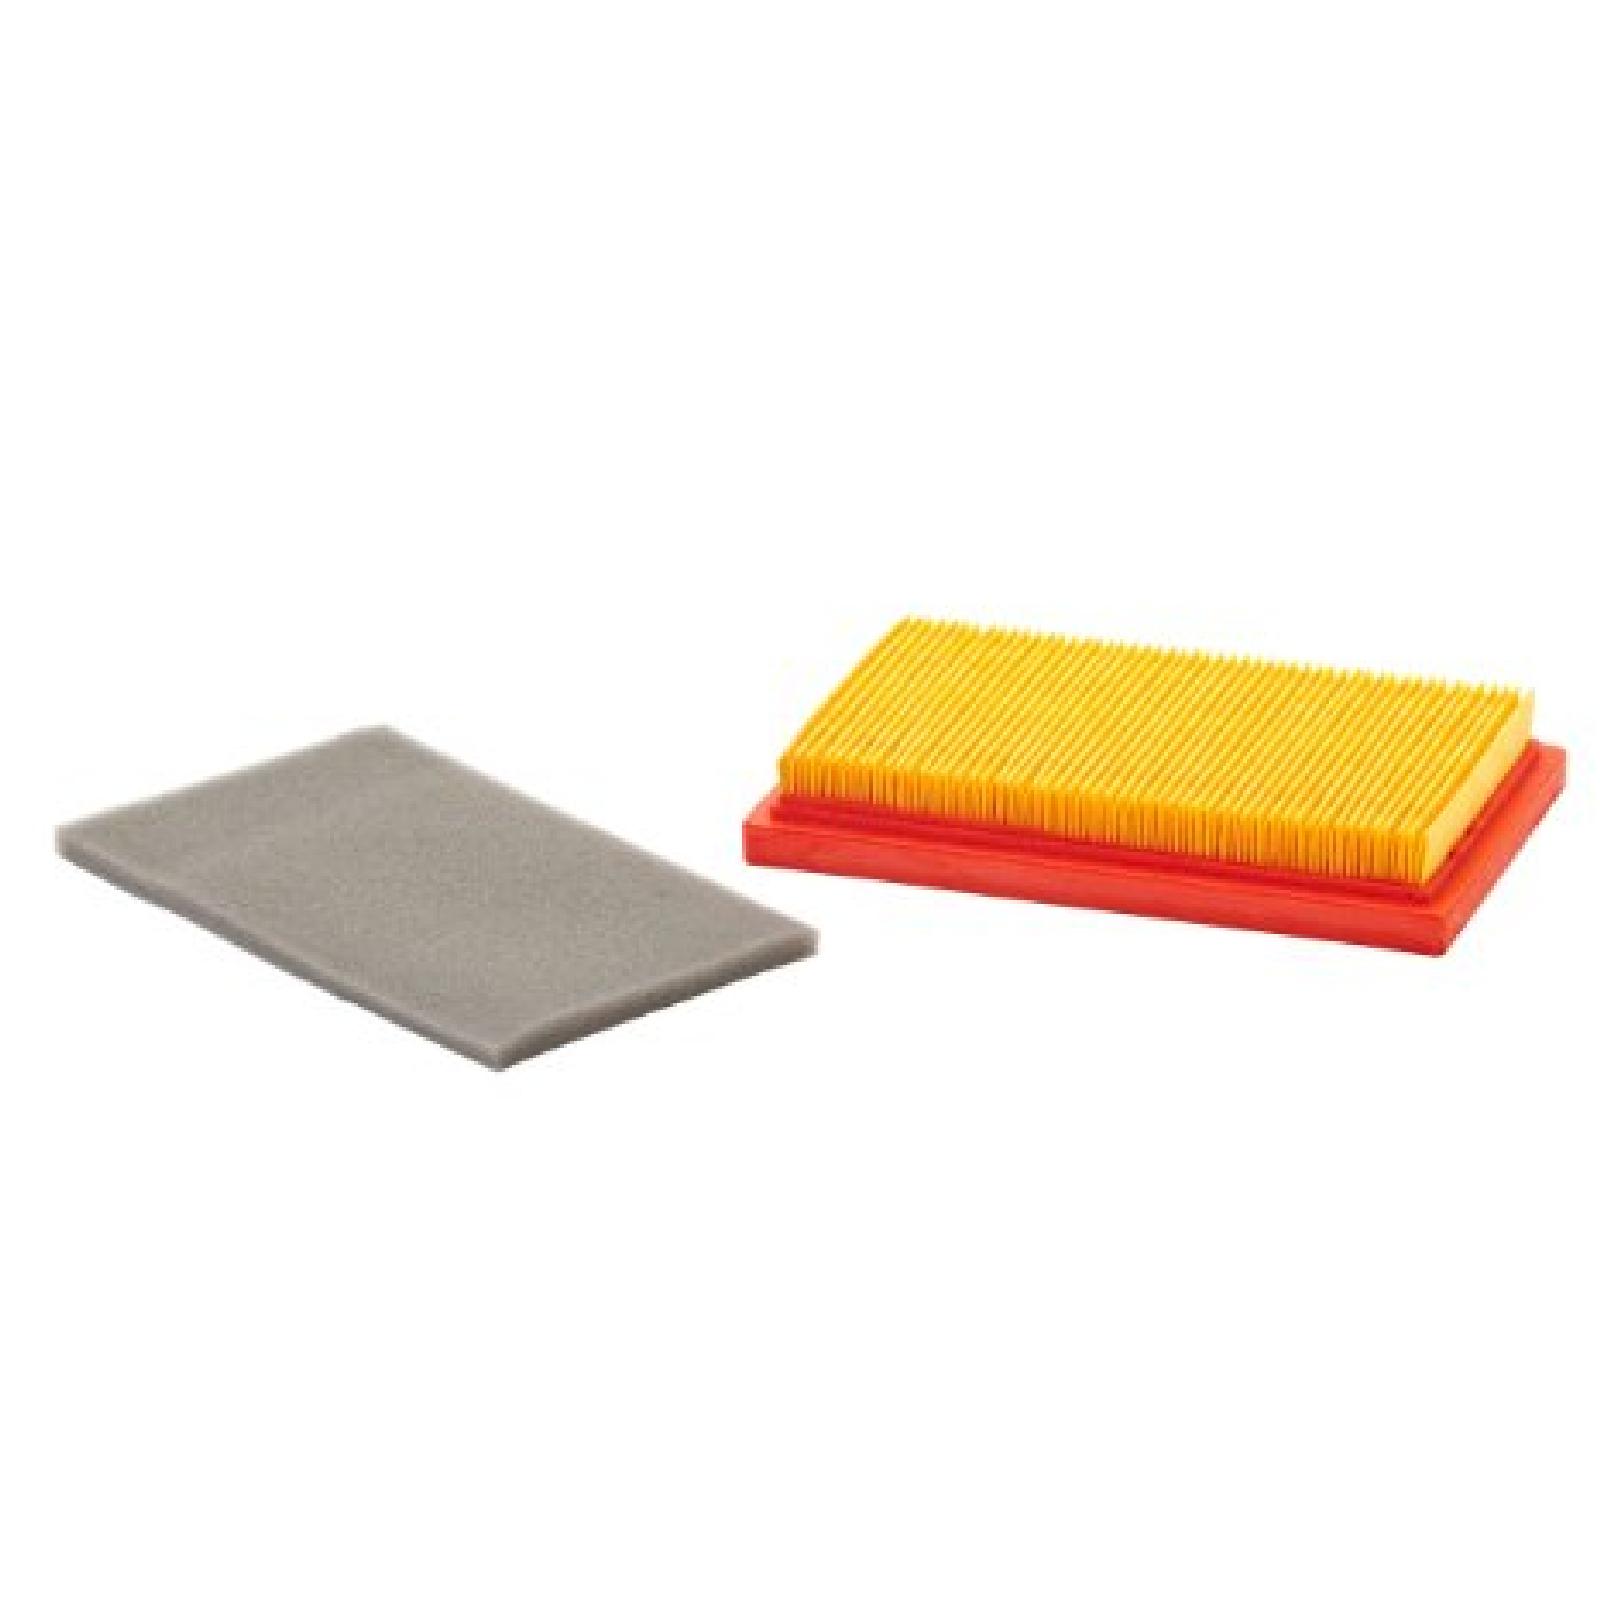 AIR FILTER, MTD 951 10298 part# 30-166 by Oregon - Click Image to Close